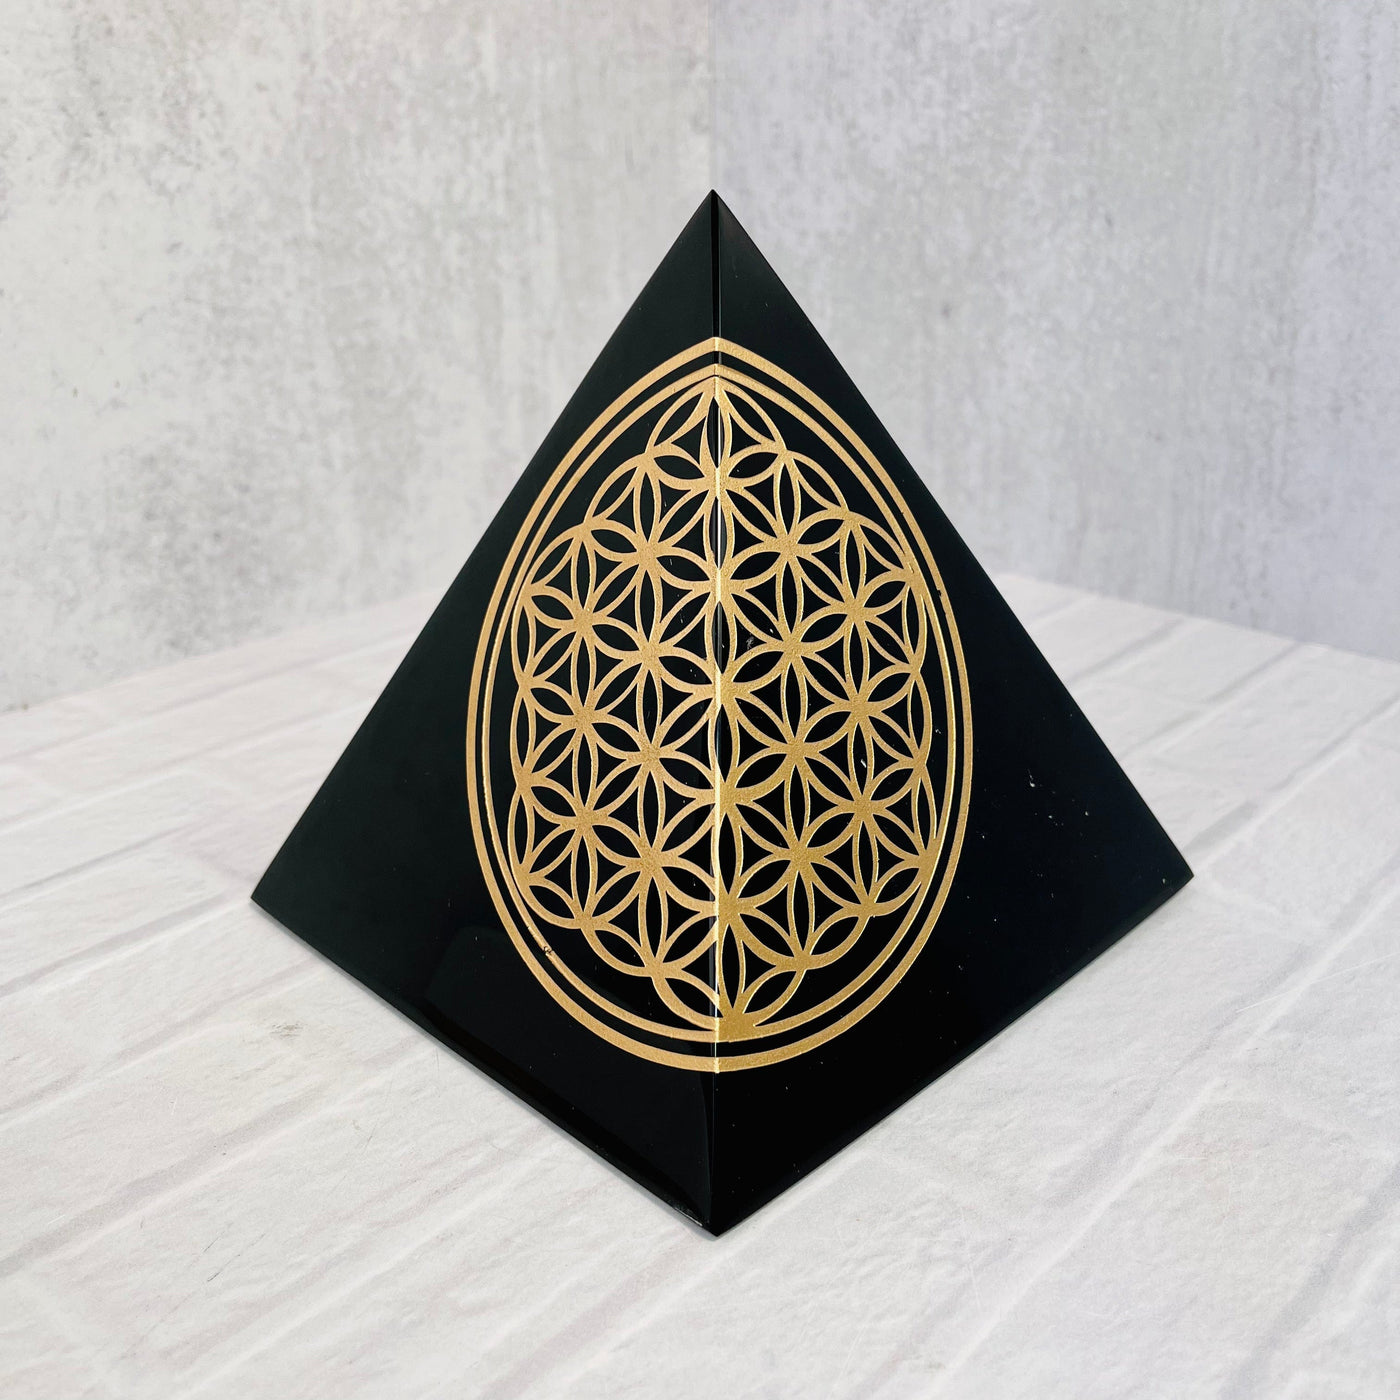 Frontal view of Gold Sheen Obsidian Flower of Life Pyramid.